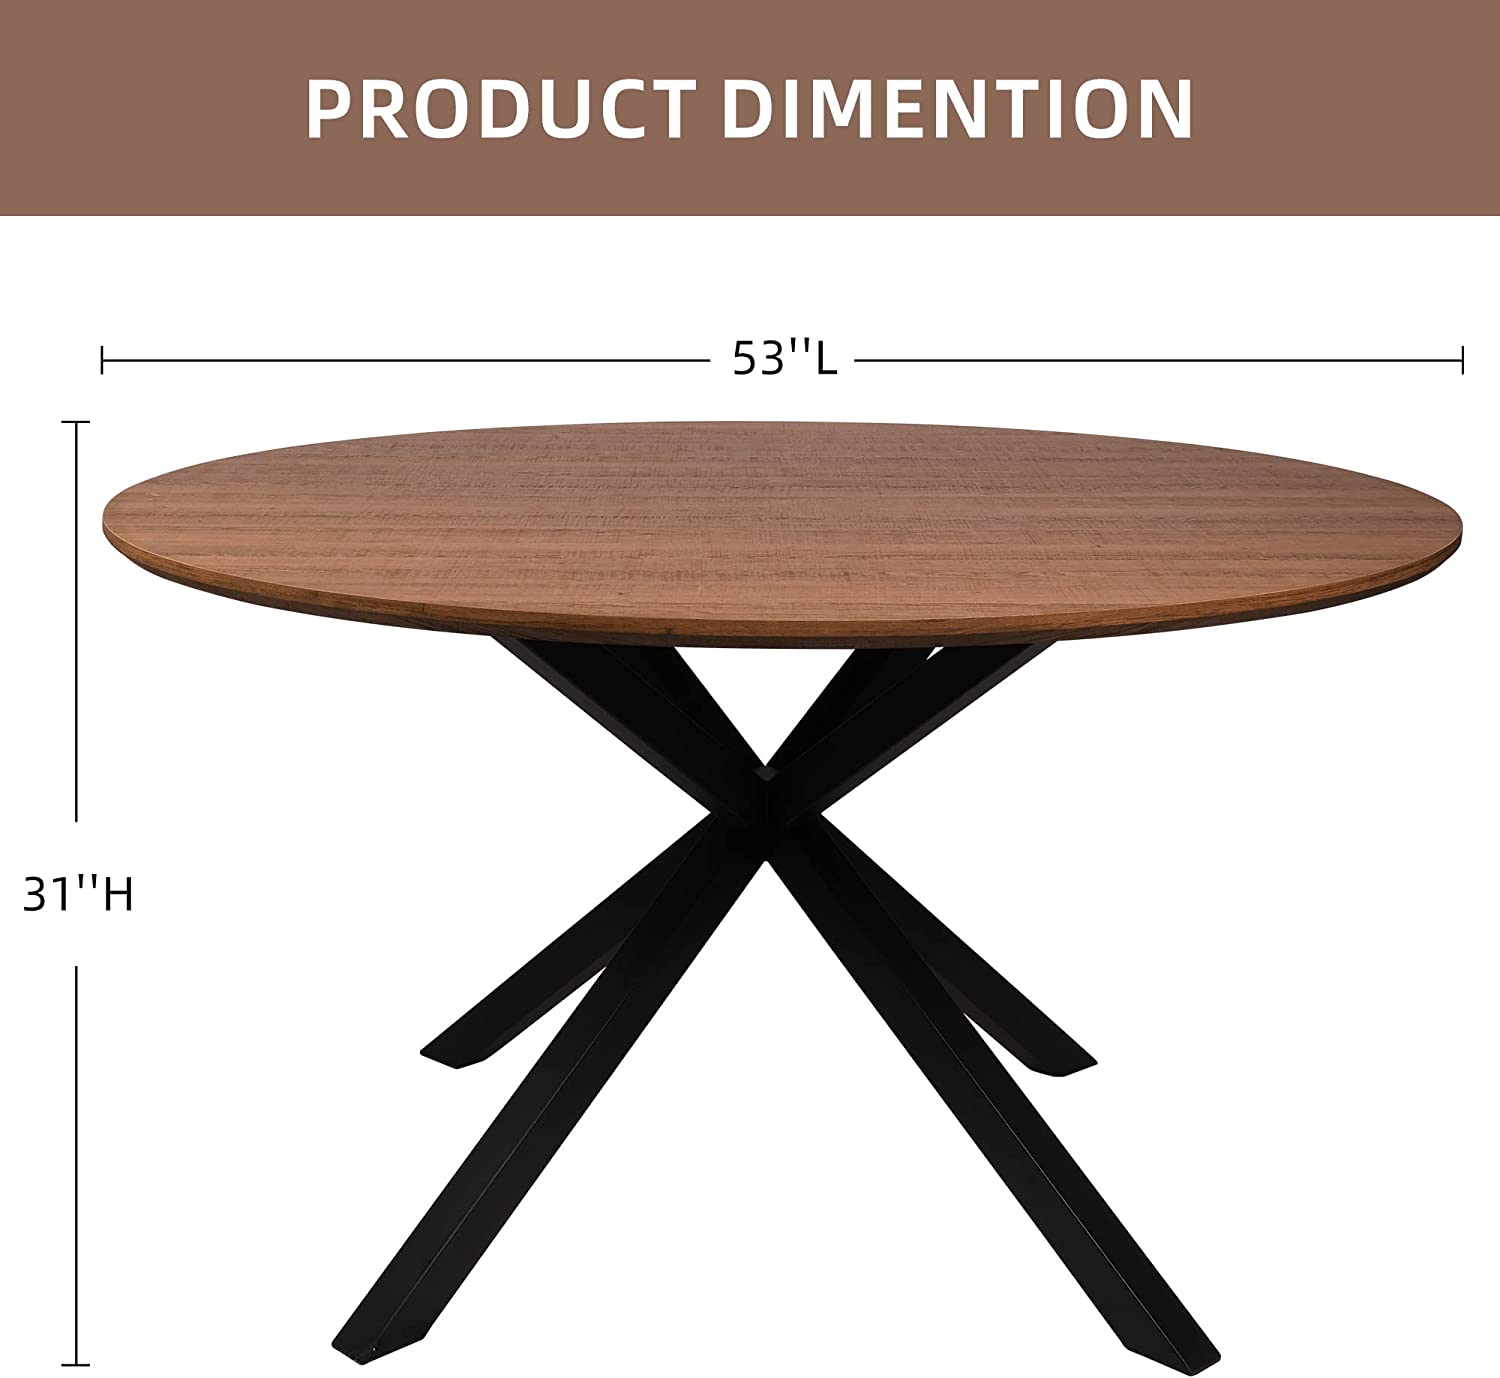 53" Mid-Century Modern Round Dining Room Table for 4-6 Person W/Solid Metal Legs, Walnut